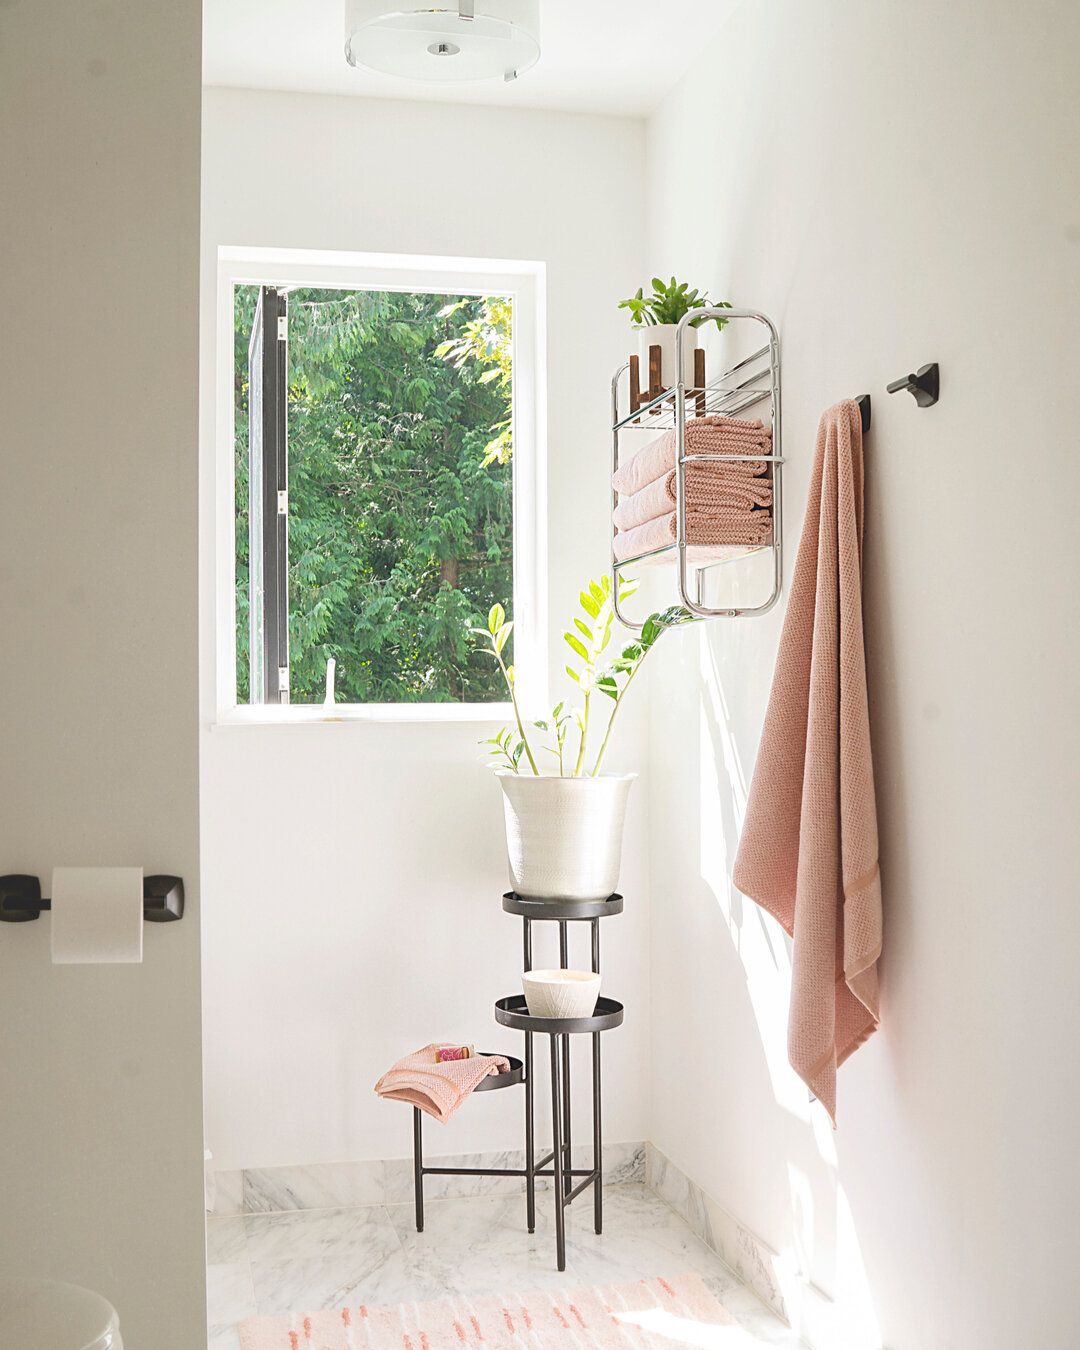 Don't you just love the light in this bathroom! When styling a white bathroom have fun with a pop of color.​​​​​​​​
I'm loving this subtle nod to blush!​​​​​​​​
​​​​​​​​
​​​​​​​​
Photo by @yuiholbrook_photography​​​​​​​​
Design by #HarpoleHomeProject